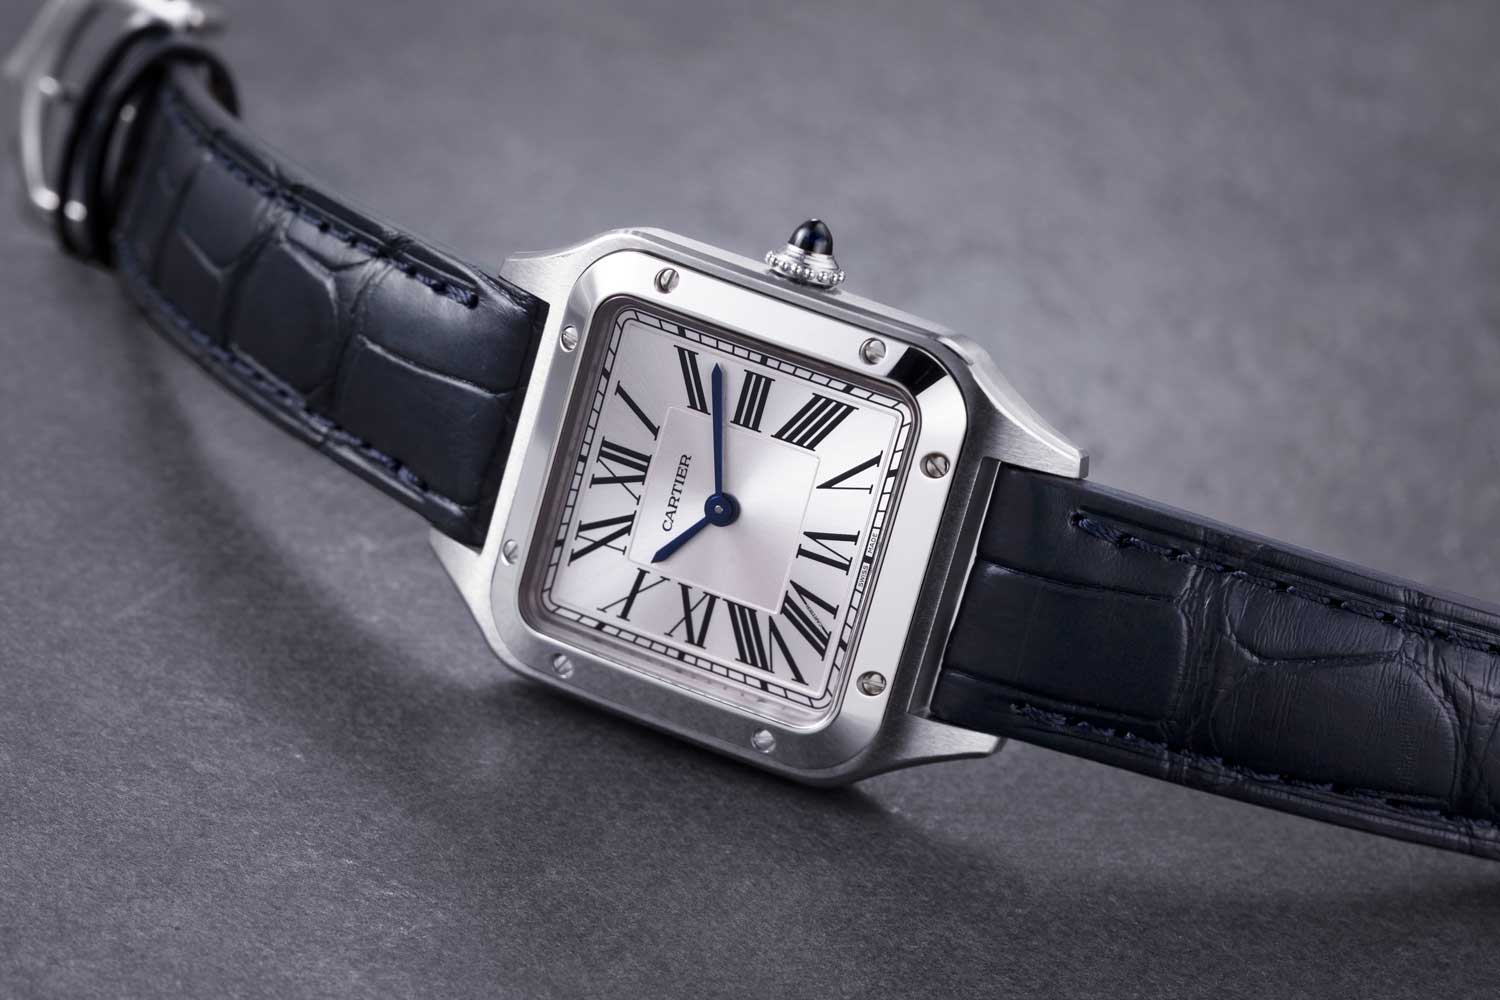 The 2019 Cartier Santos-Dumont Watch, measuring in at 31.4 x 43.5 mm, in stainless steel; powered by a quartz movement (©Revolution)